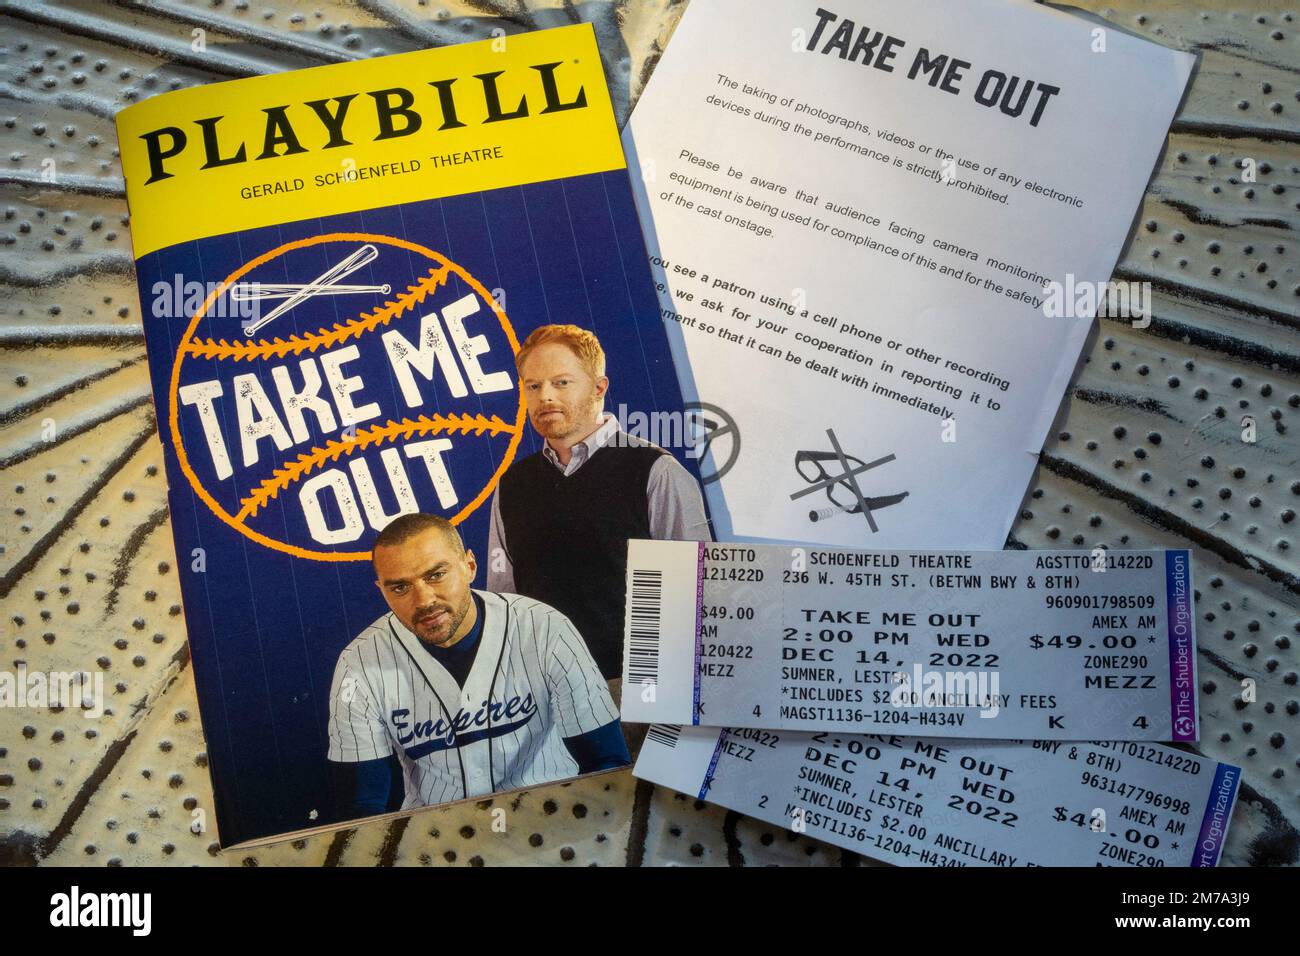 'Take Me Out' playbill from the Gerald Schoenfeld Theatre, New York City, USA  2022 Stock Photo